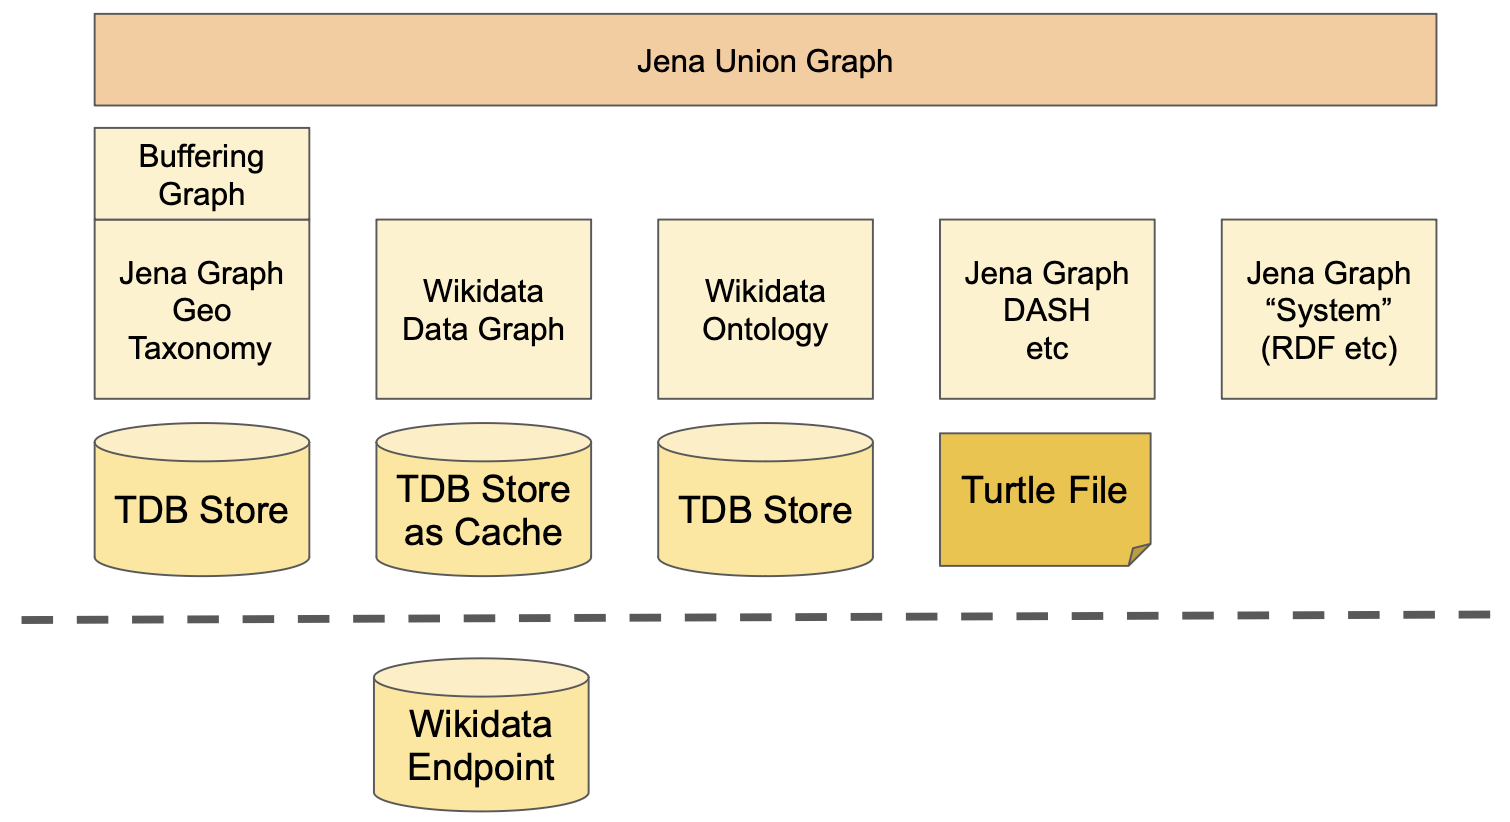 TopBraid EDG Architecture with Wikidata as a Remote Data Source